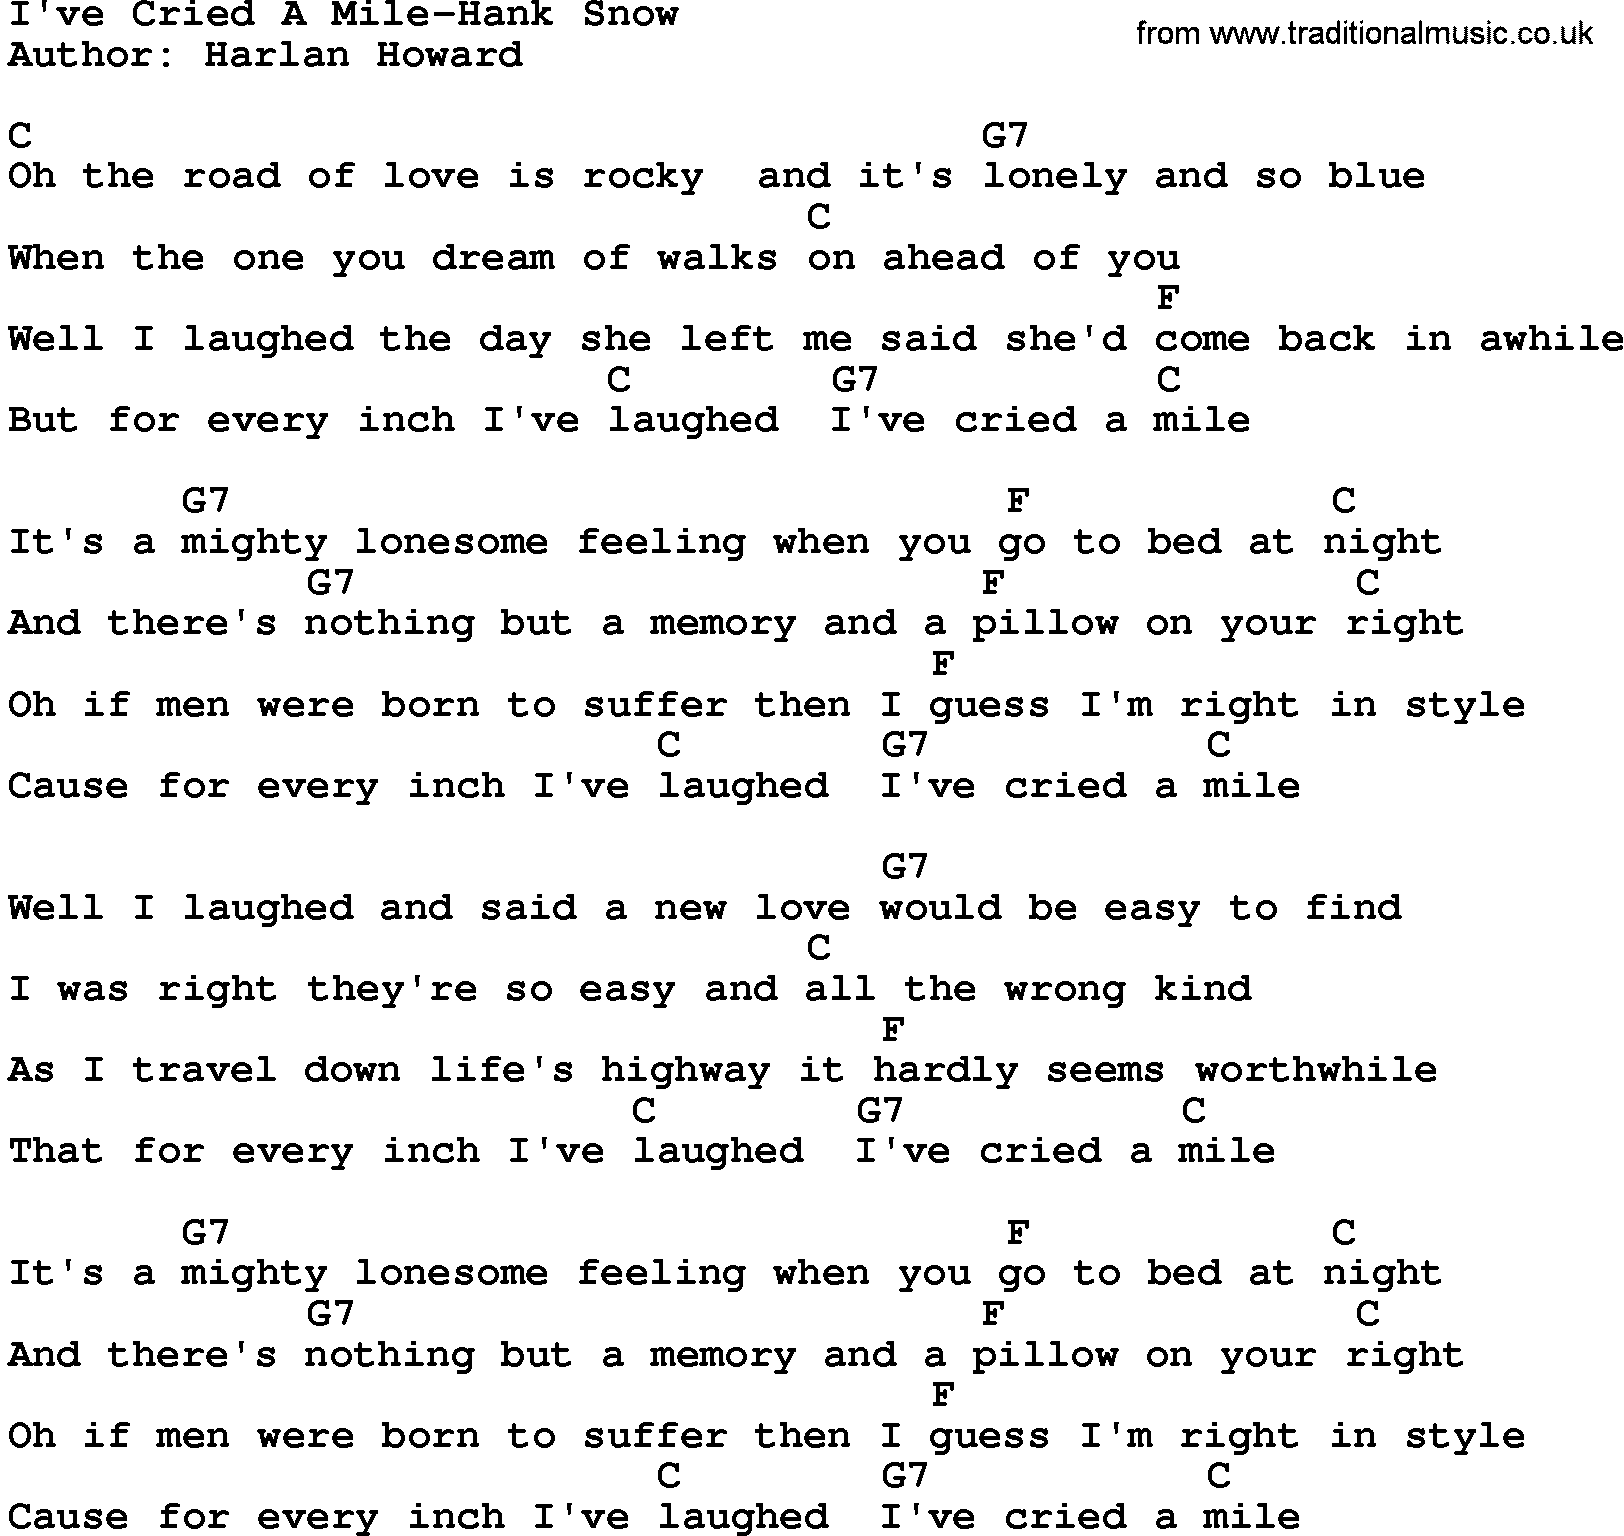 Country music song: I've Cried A Mile-Hank Snow lyrics and chords